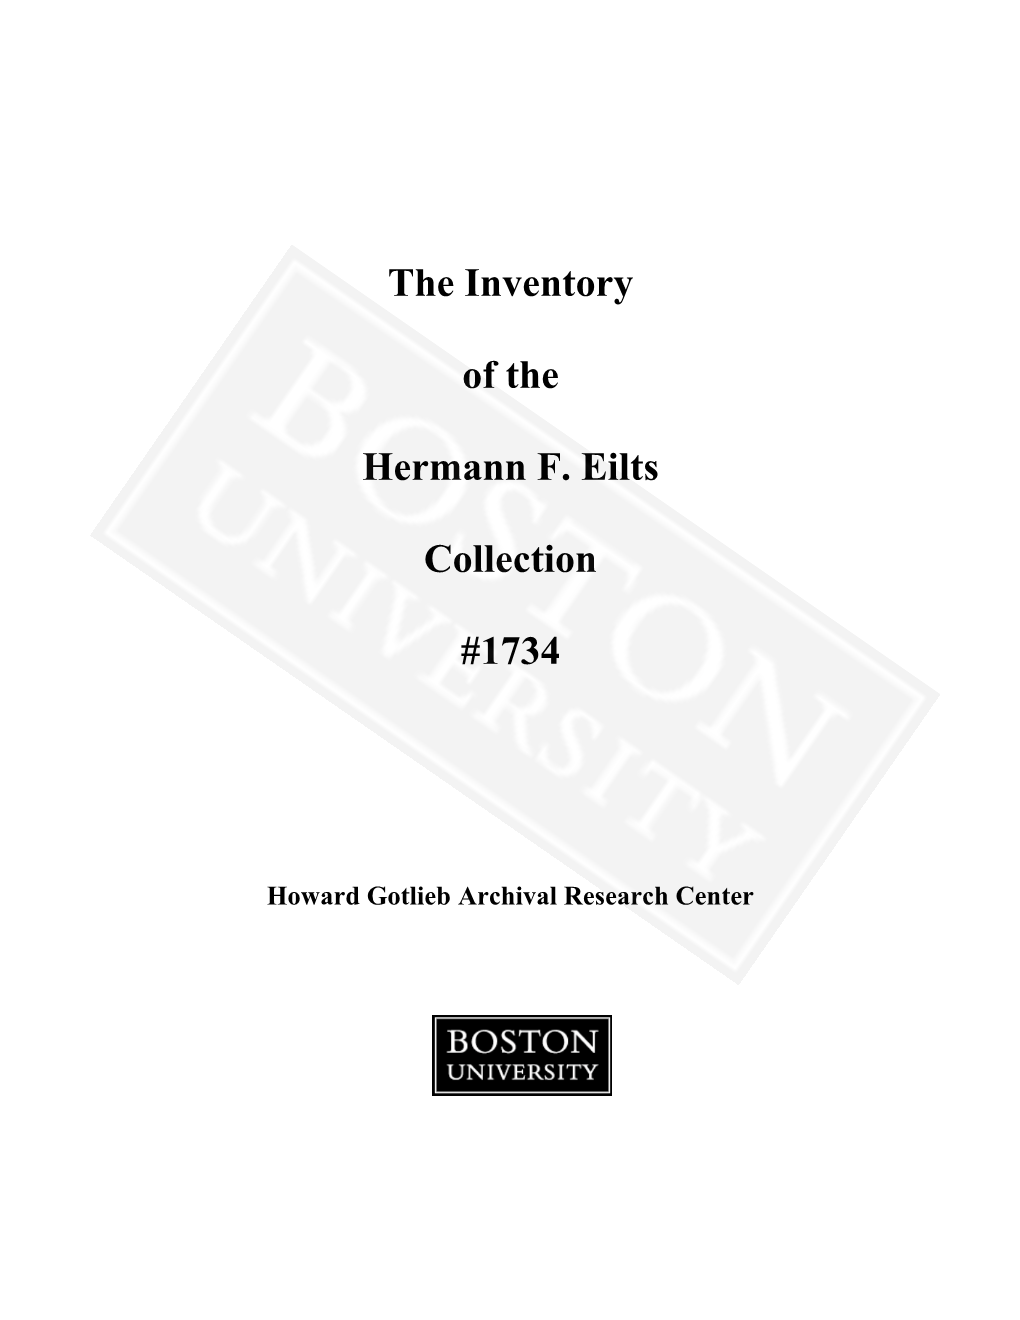 The Inventory of the Hermann F. Eilts Collection #1734